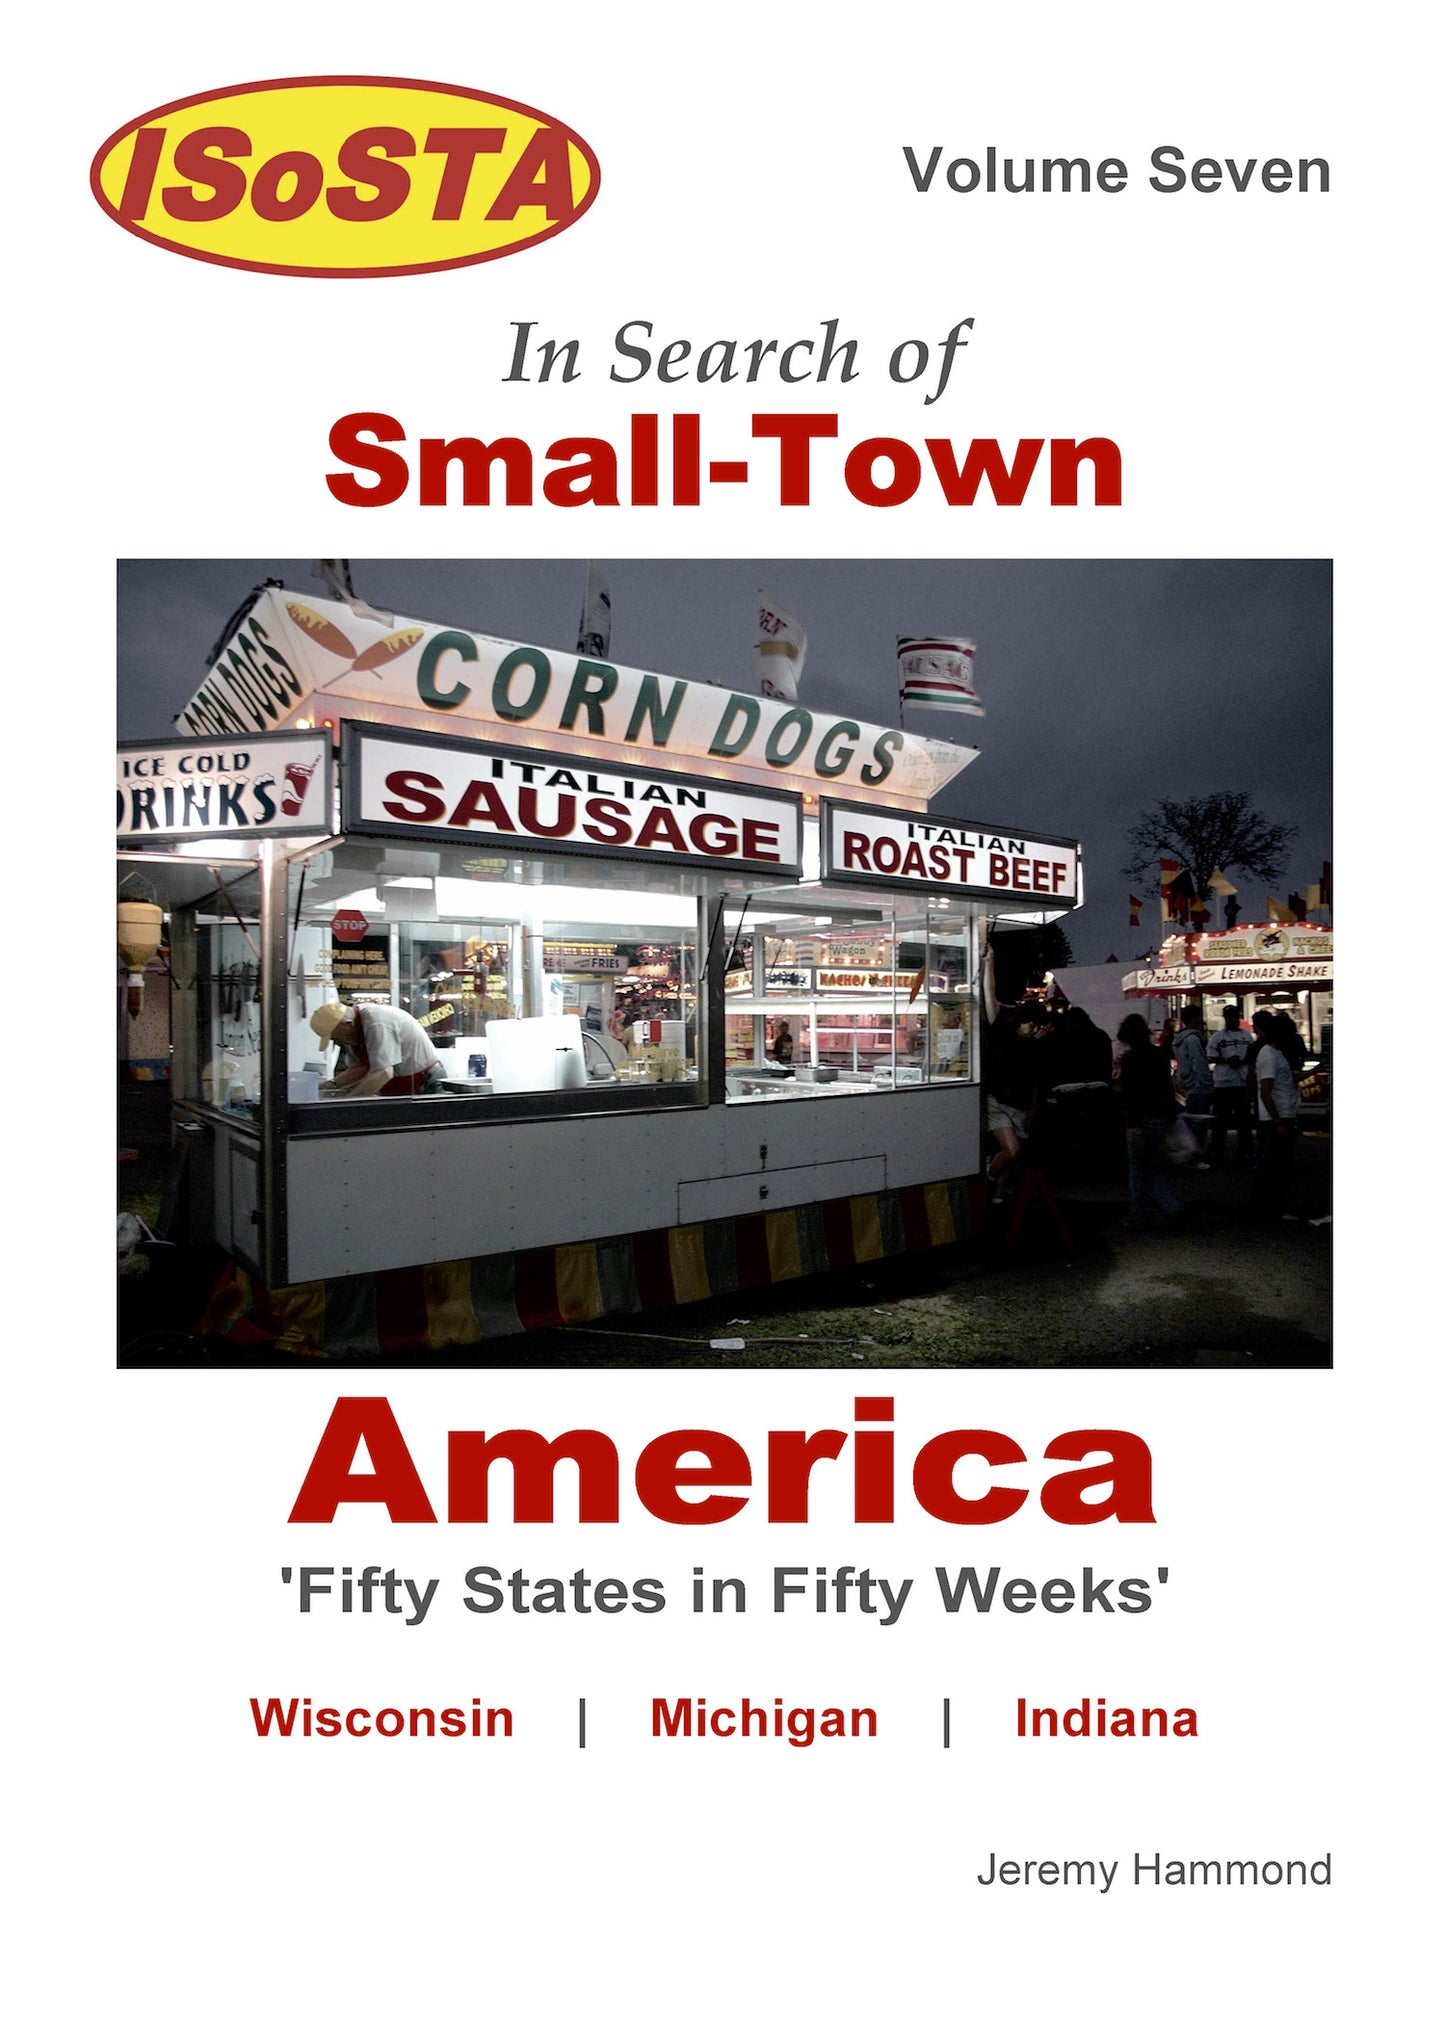 In Search of Small-Town America: Volume 7